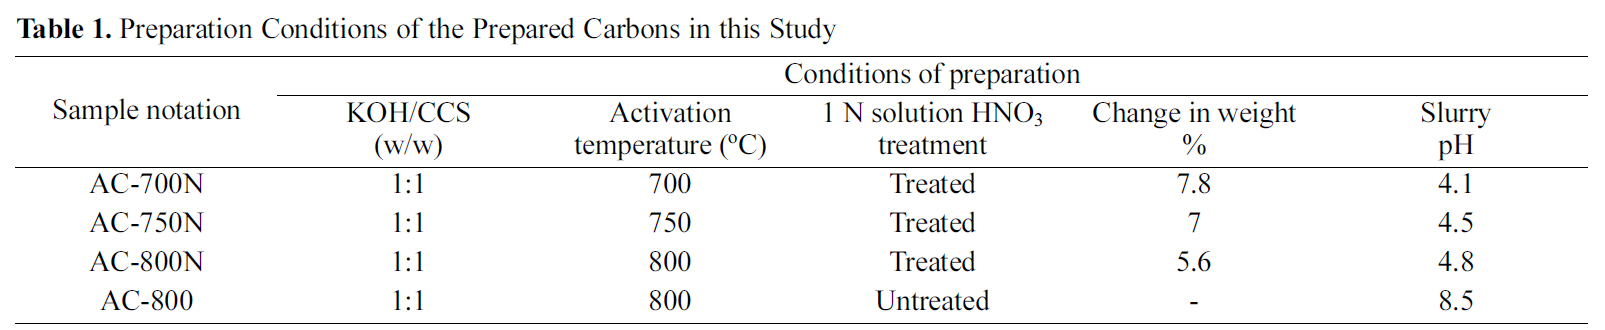 Preparation Conditions of the Prepared Carbons in this Study